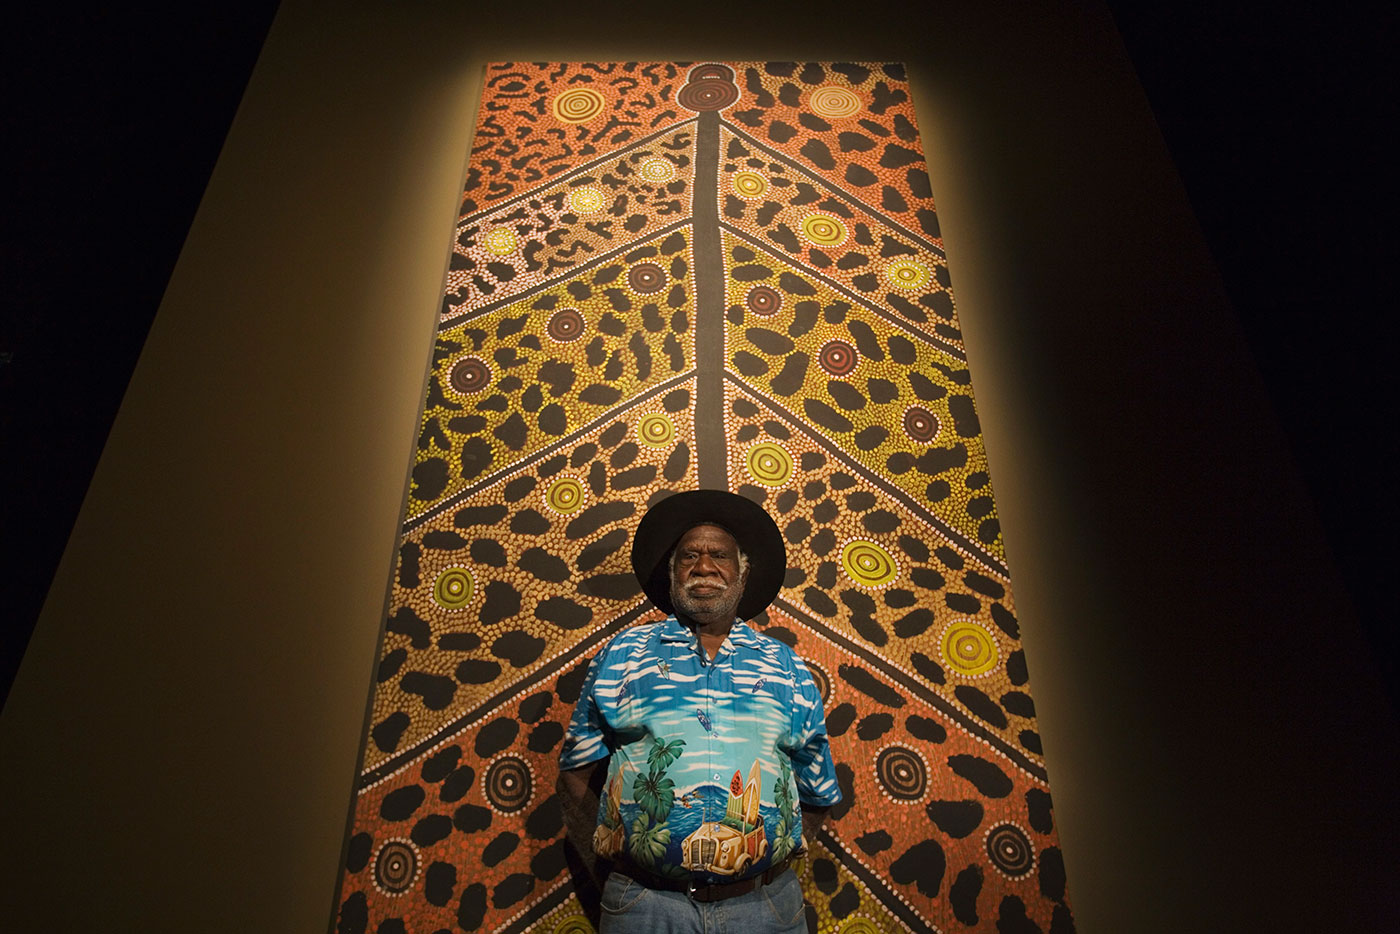 Long Jack Phillipus Tjakamarra standing in front of large canvas. - click to view larger image